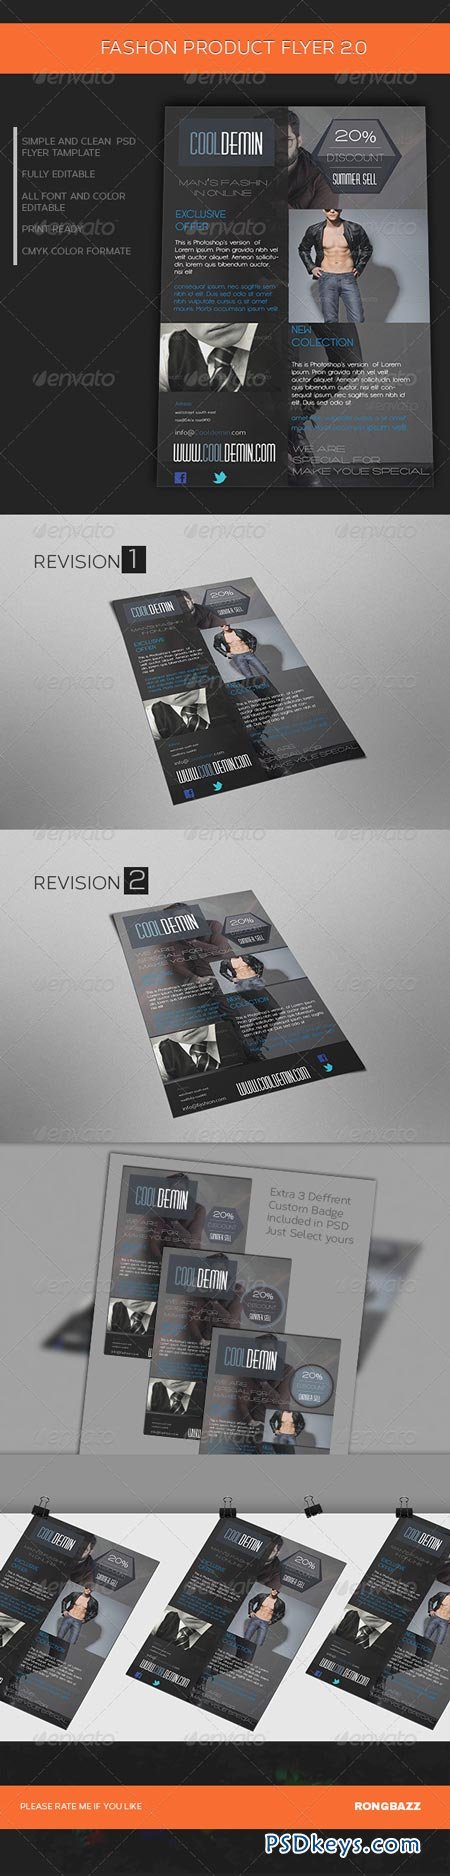 Man's Fashion Product Flyer Template 2.0 6898777